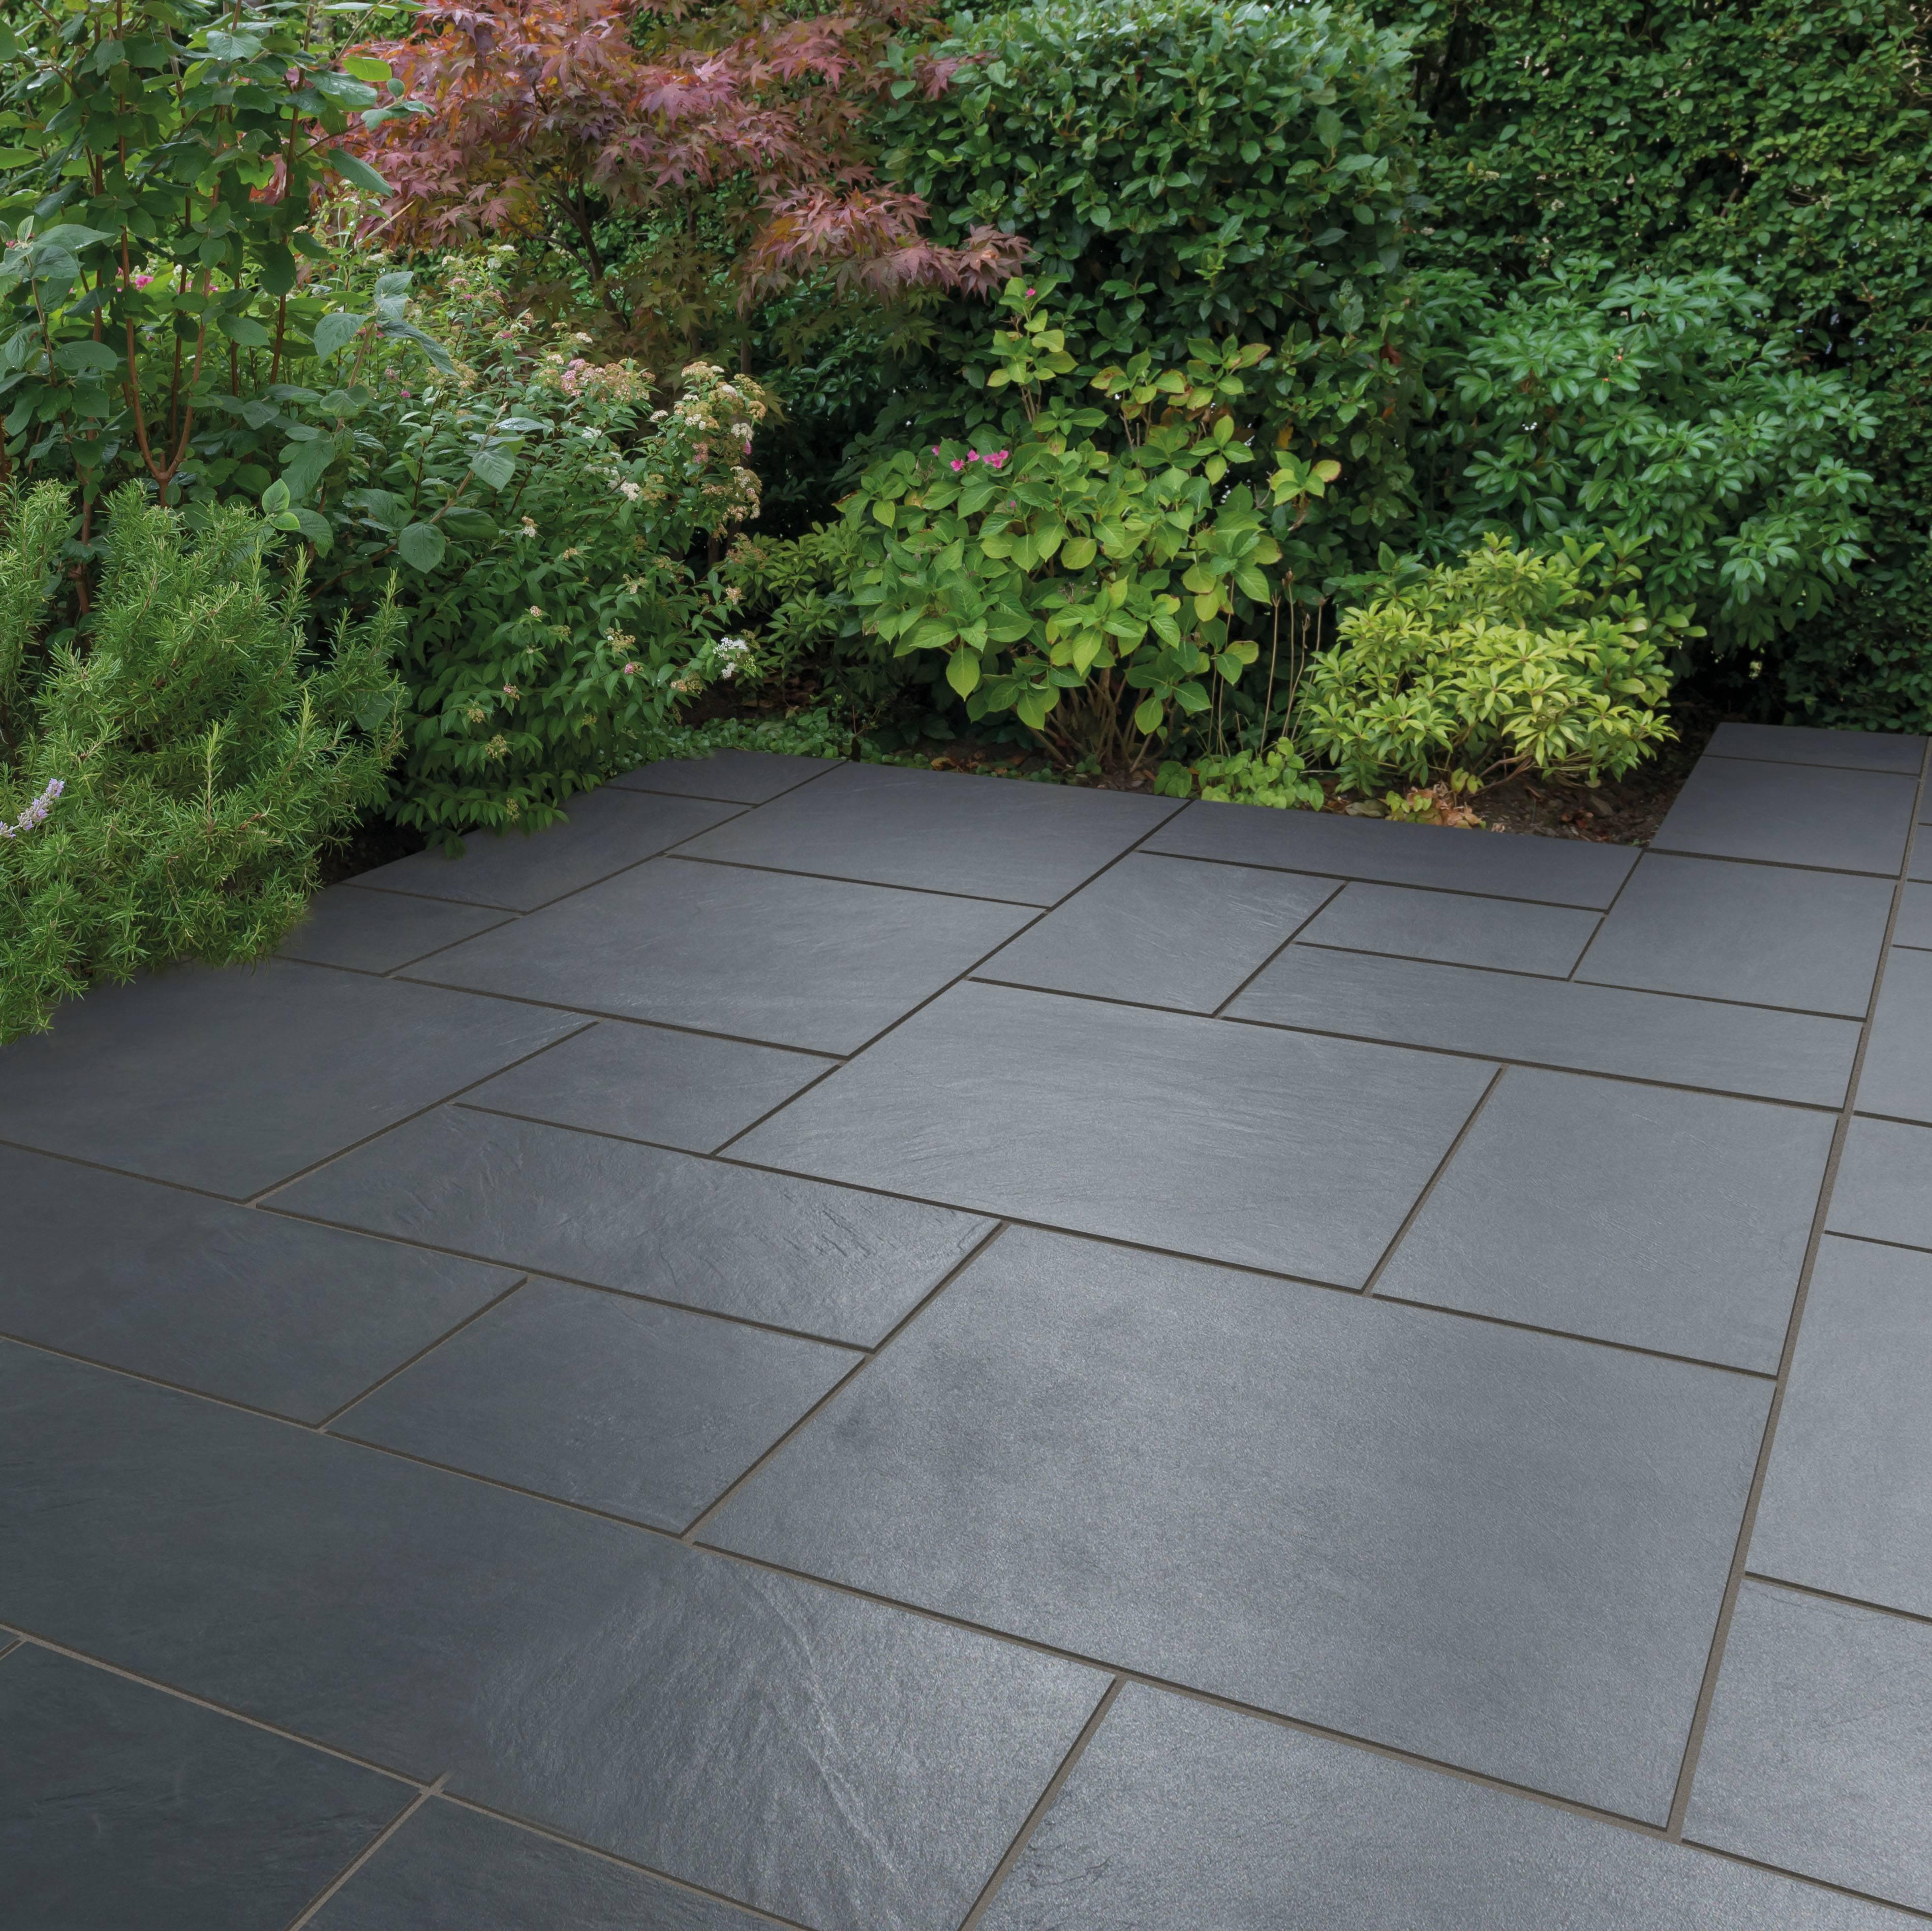 New Bradstone Products and Paving Trends for 2019